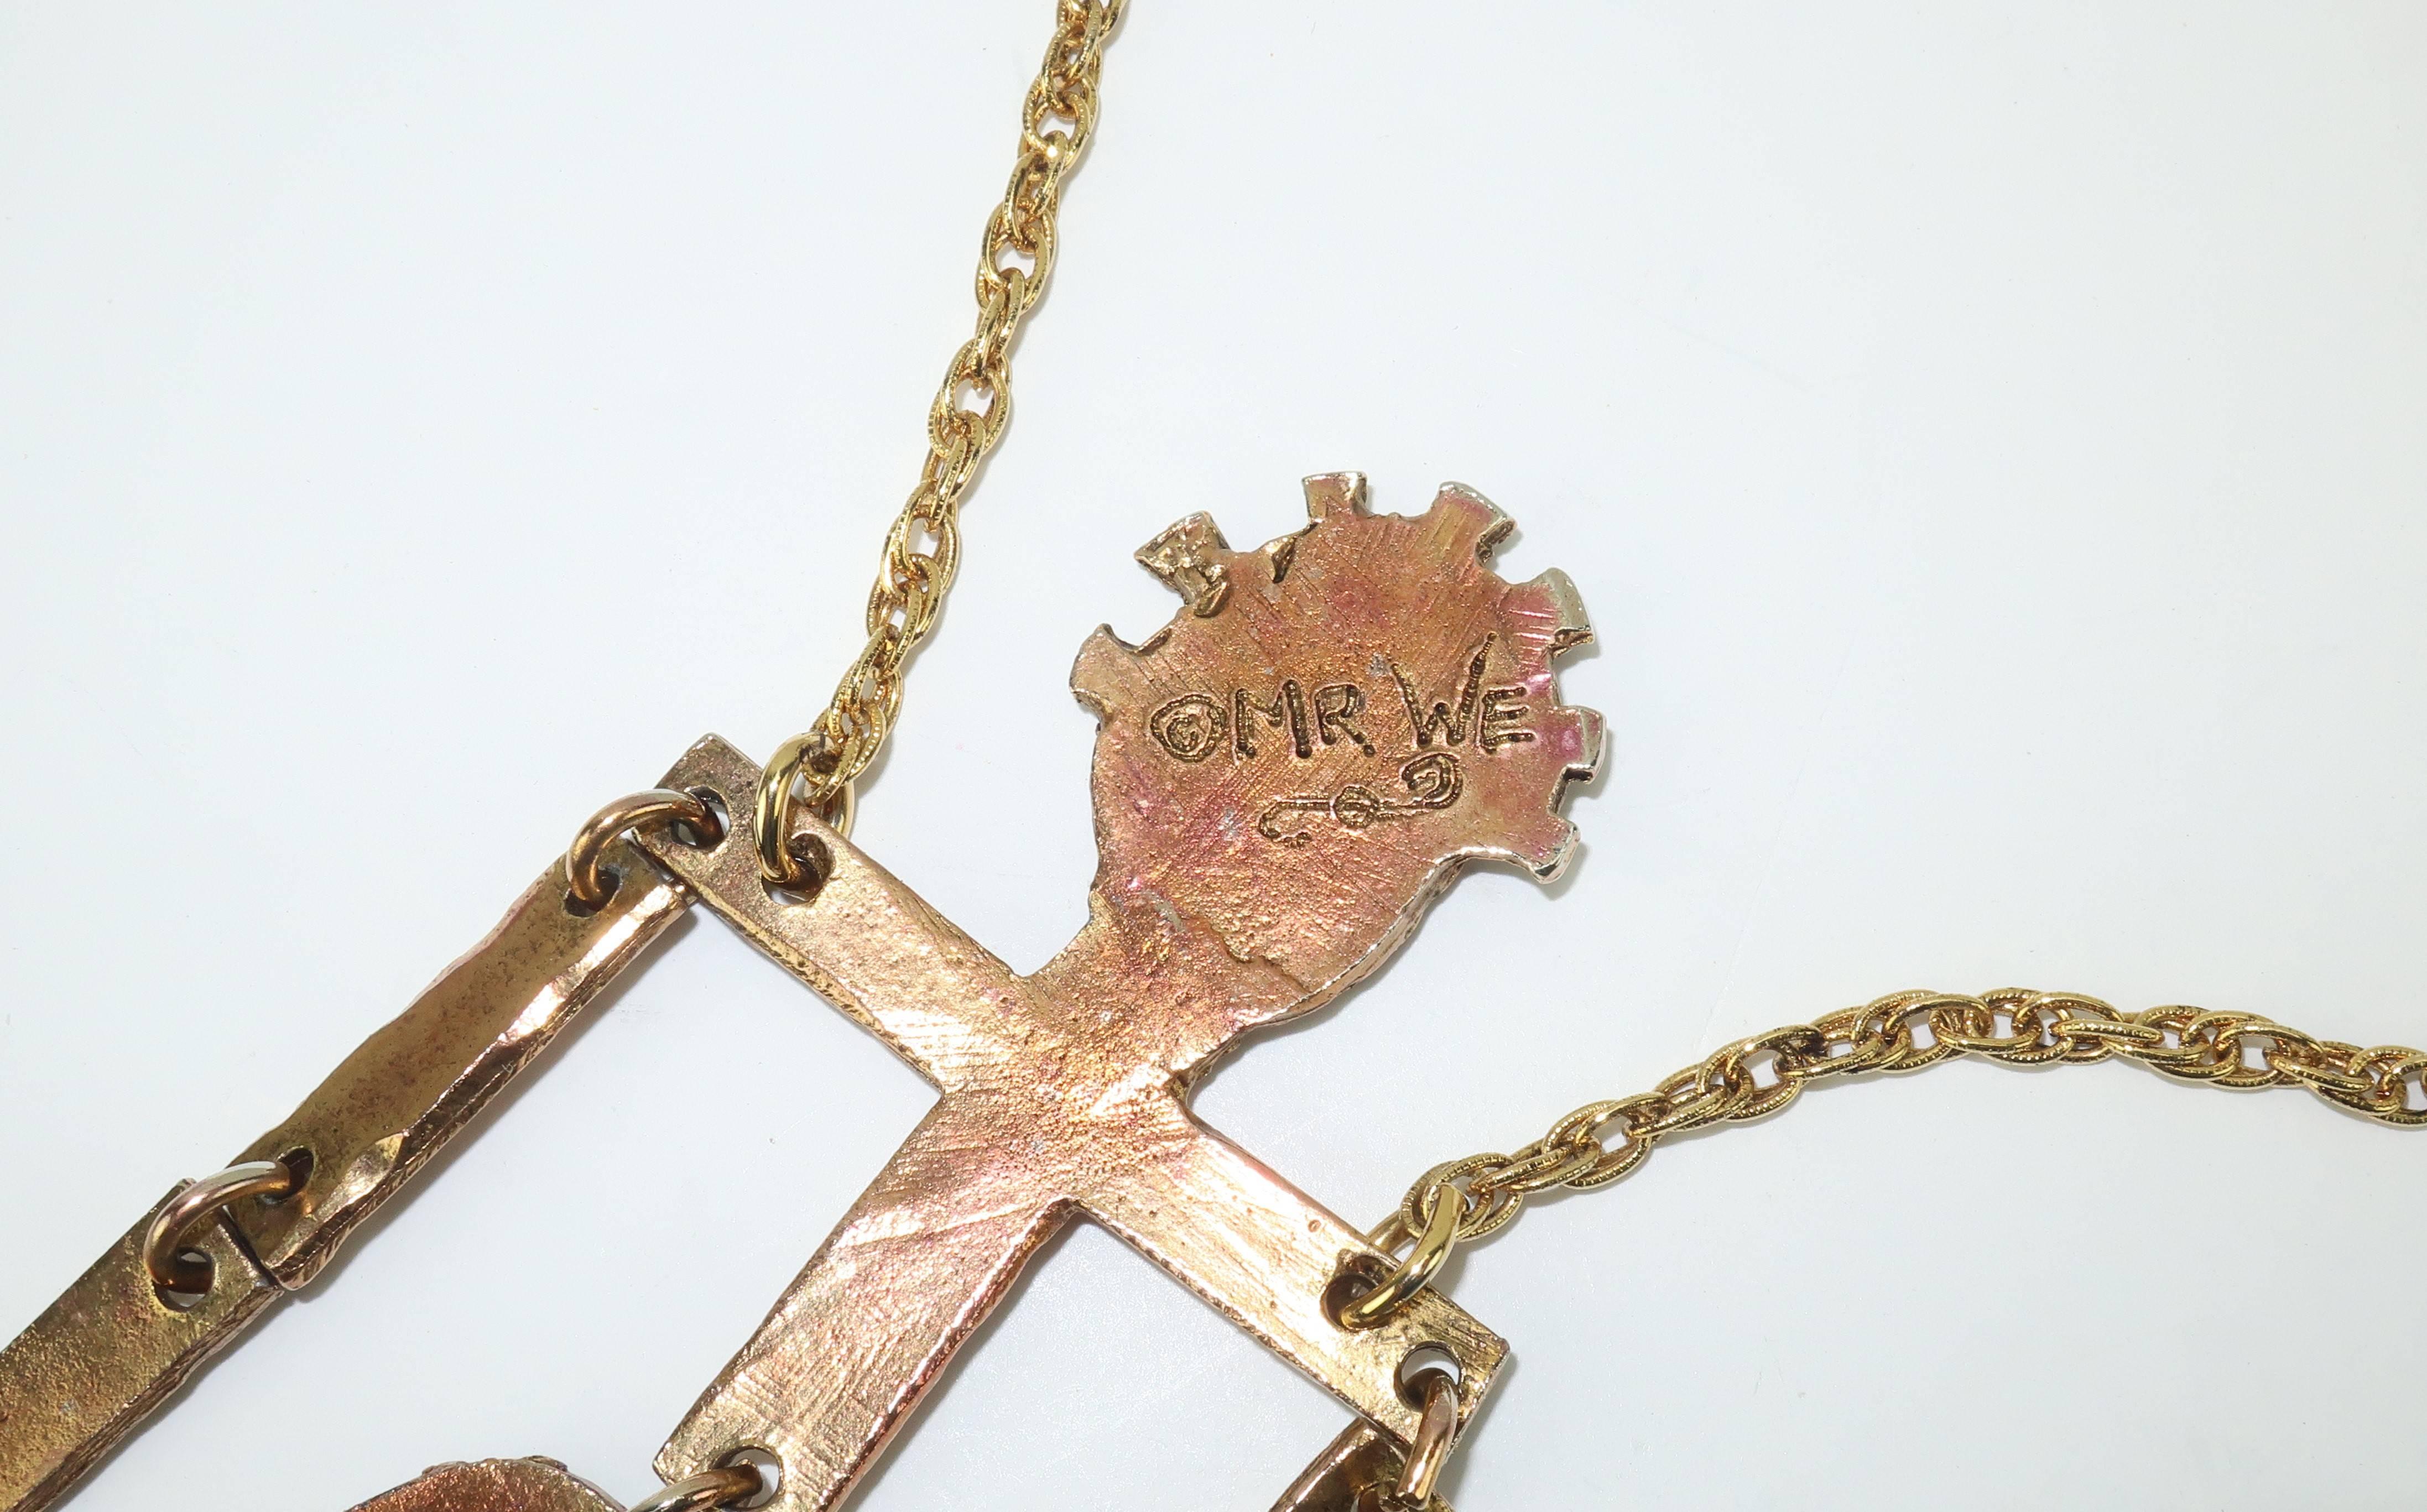 C.1970 Mr. We Articulated Man Pendant Necklace 2